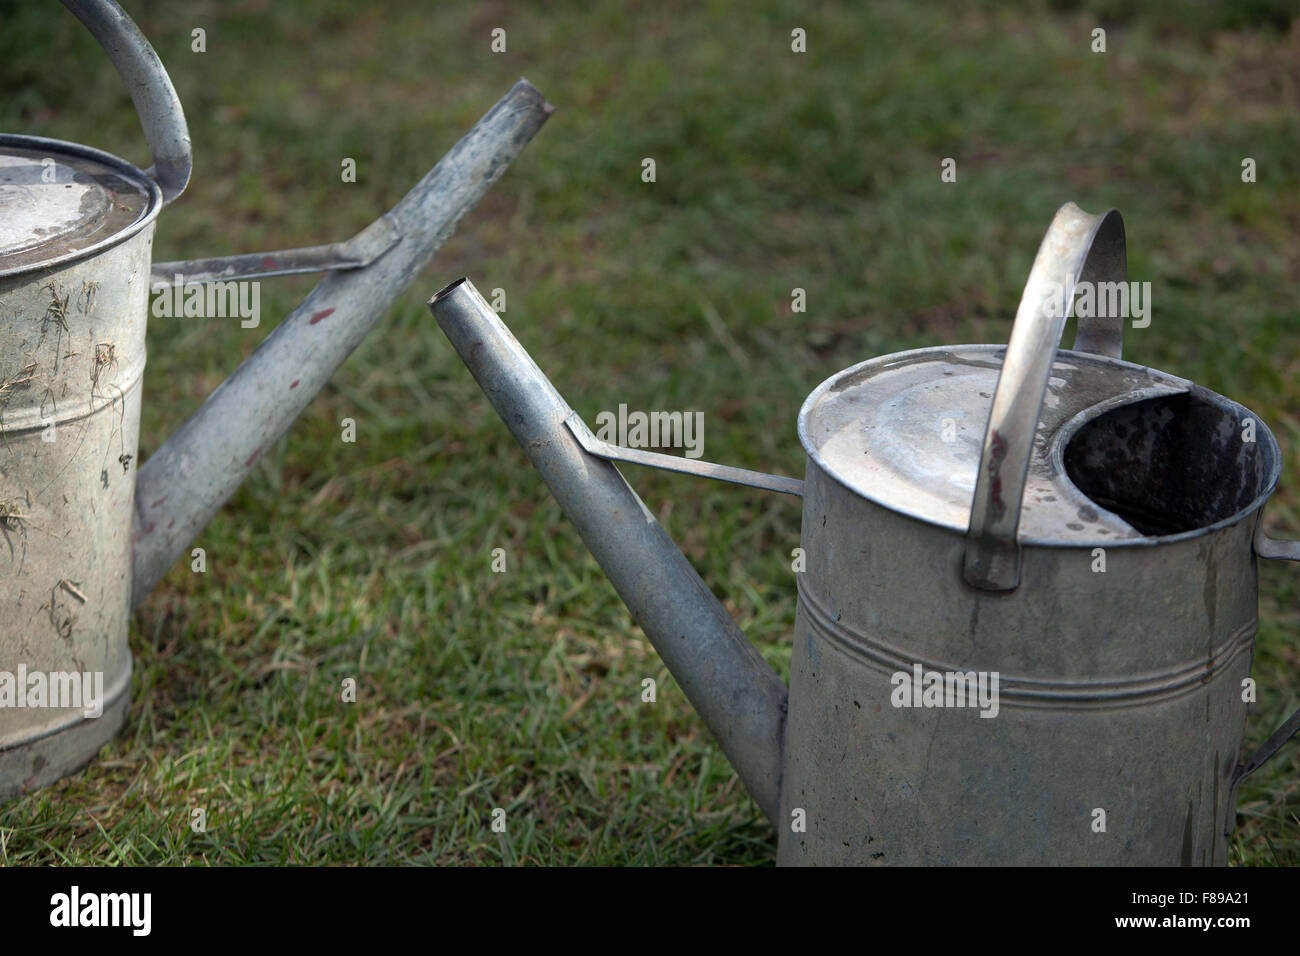 A metal watering cans on a garden lawn Stock Photo